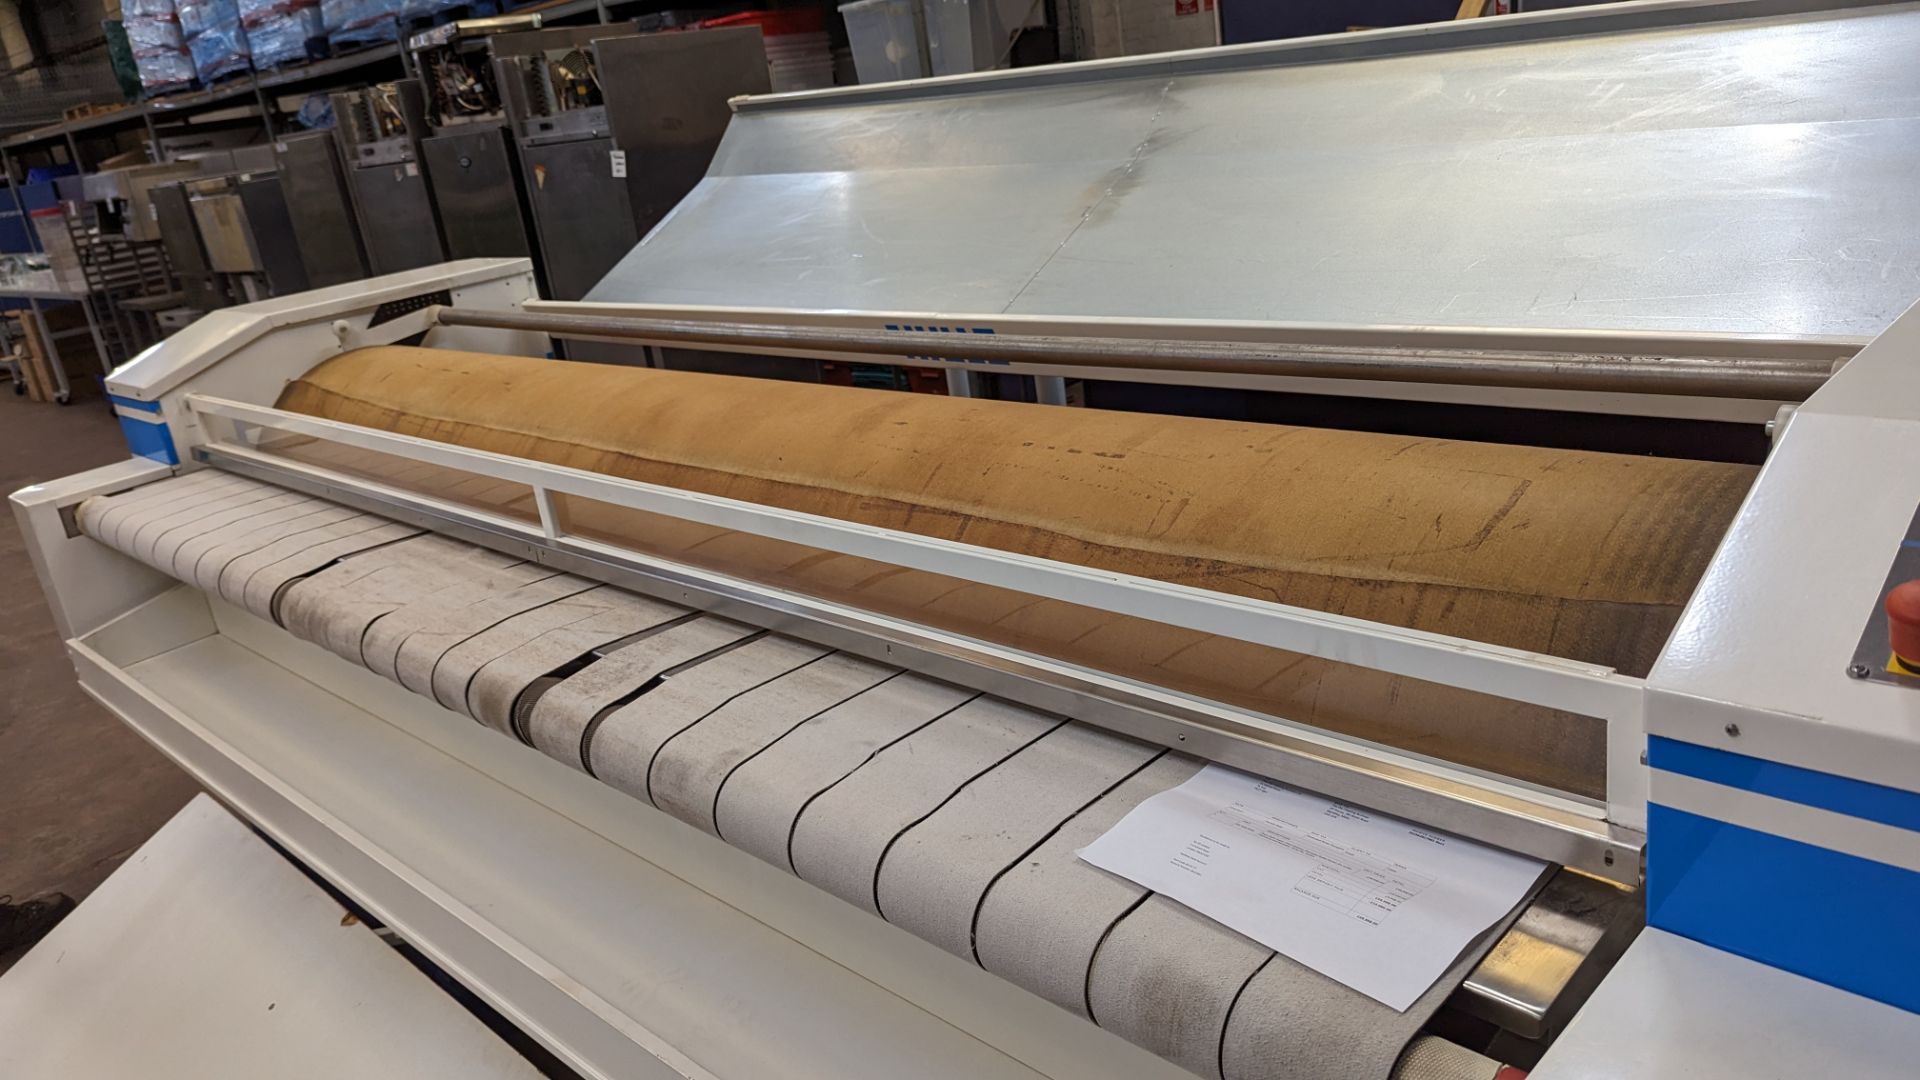 2017 Stahl flatwork ironer Super Chest ironing system, type MC 600/3000 D - Image 15 of 20